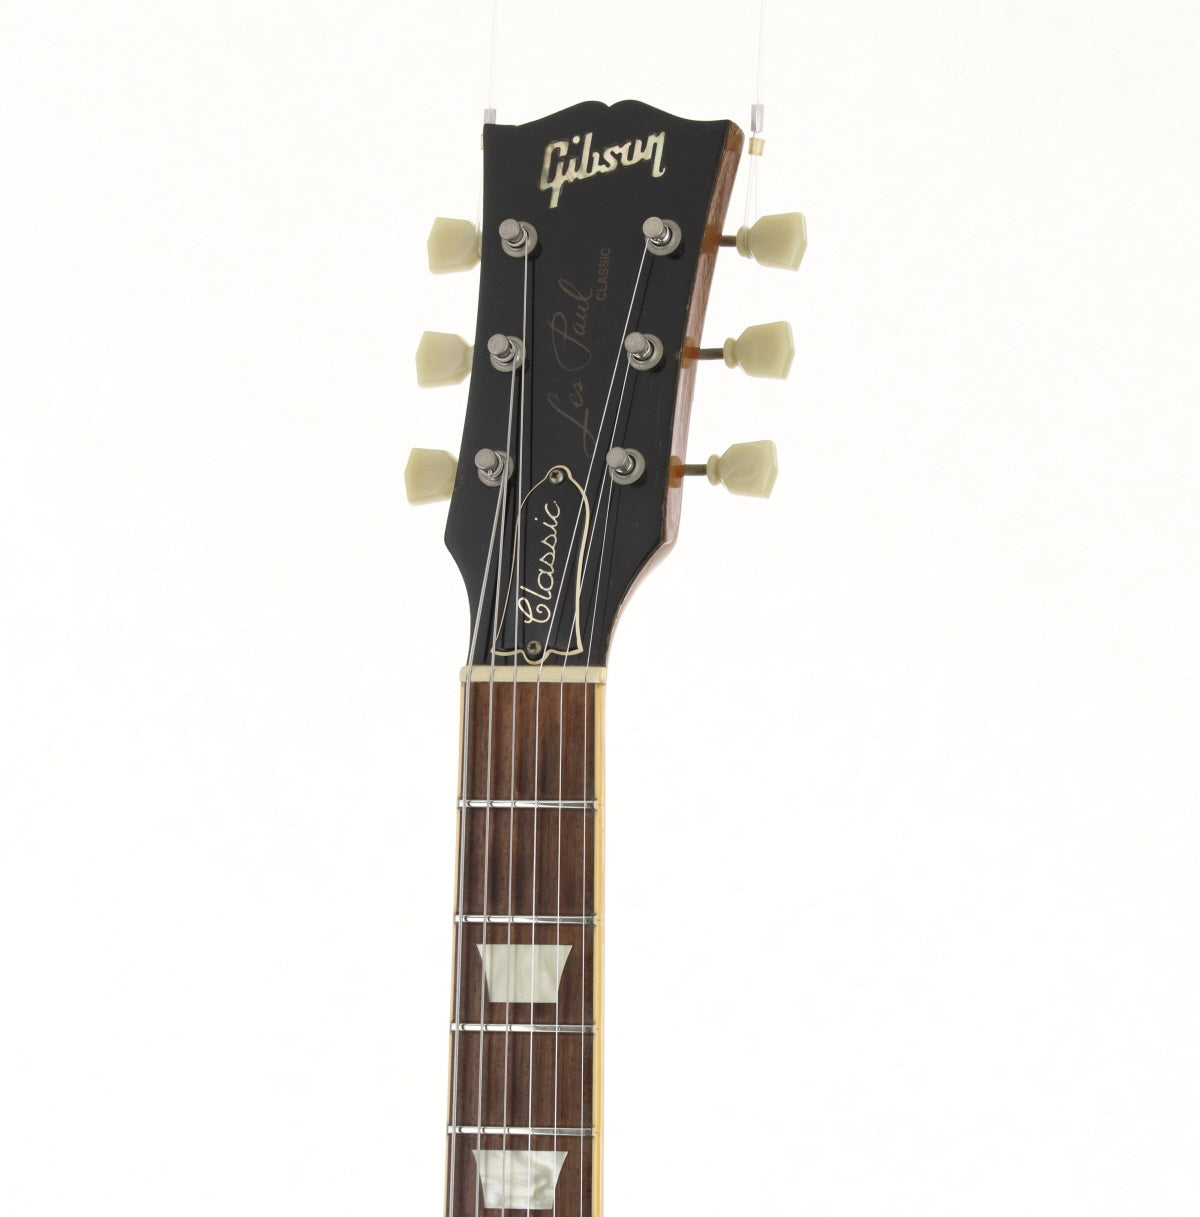 [SN 7 2170] USED Gibson USA / Les Paul Classic Gold Top 1997 [03]